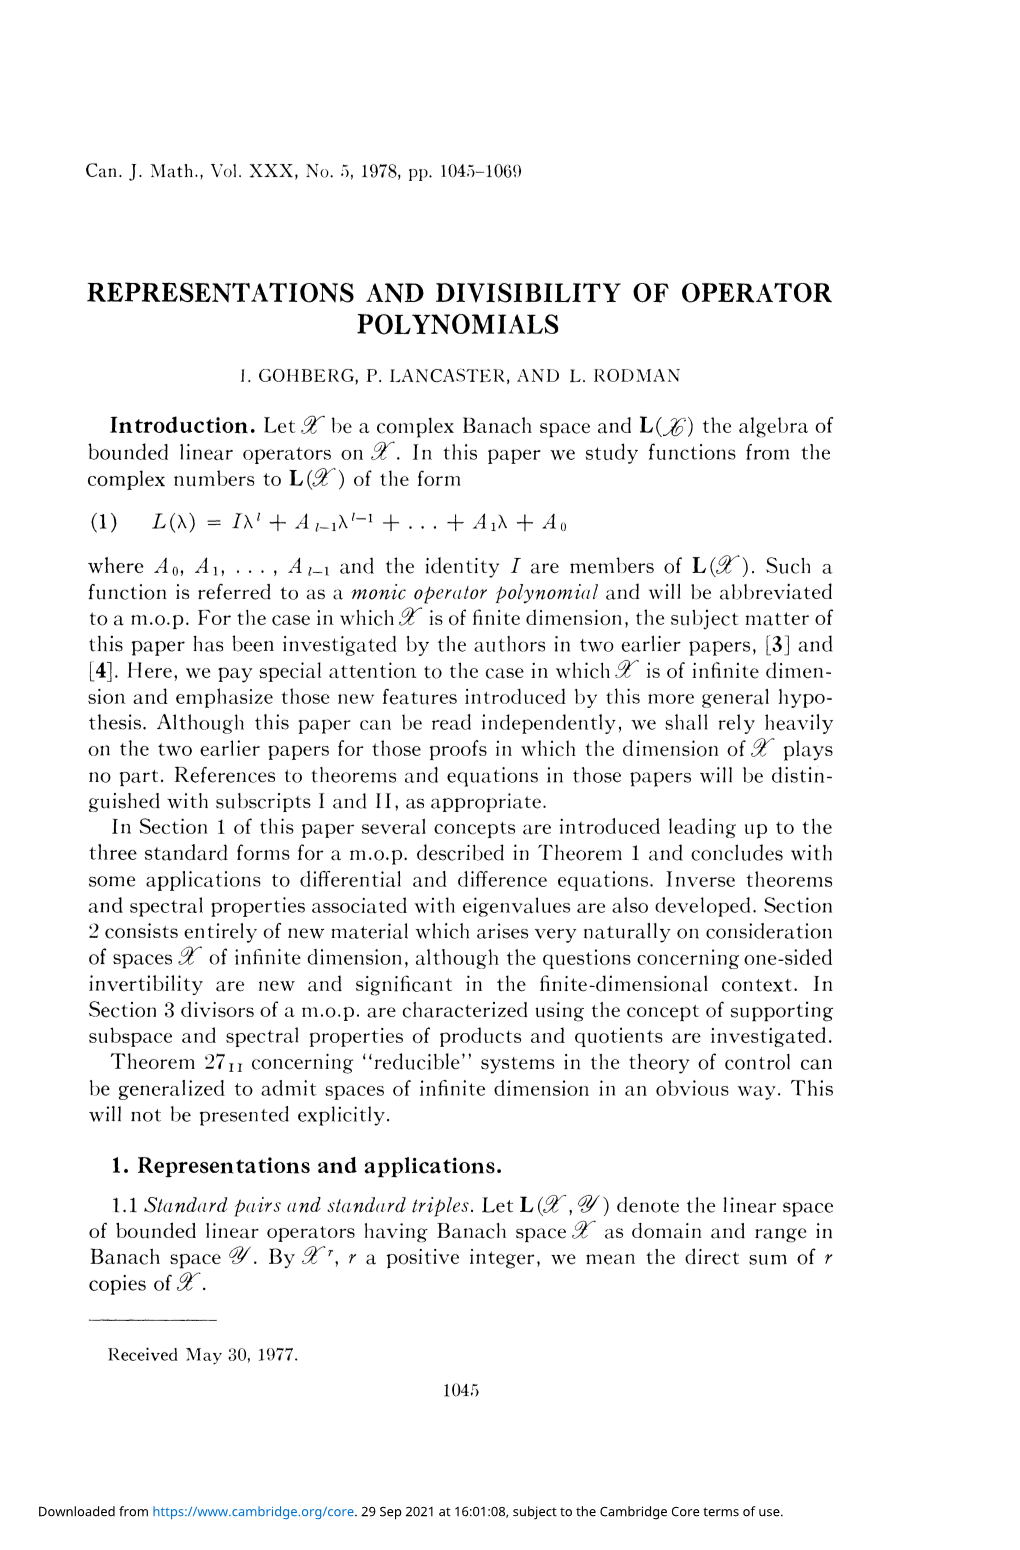 Representations and Divisibility of Operator Polynomials